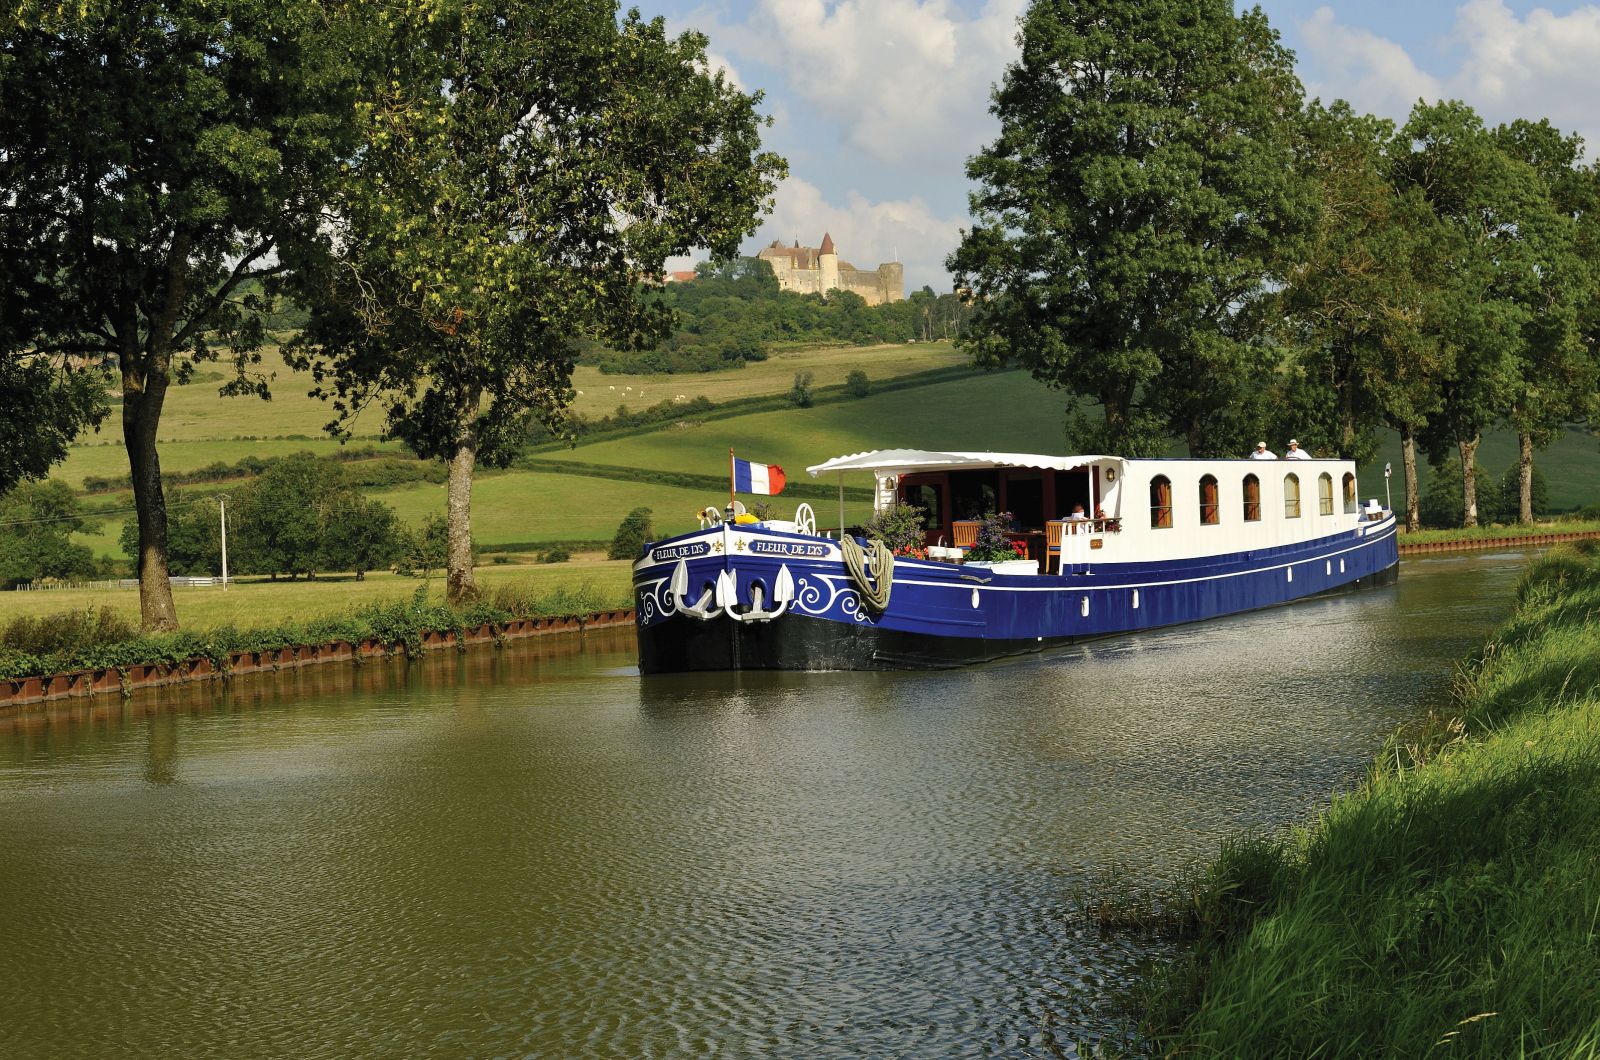 The Belmond Fleur de Lys river barge sailing through the French countryside